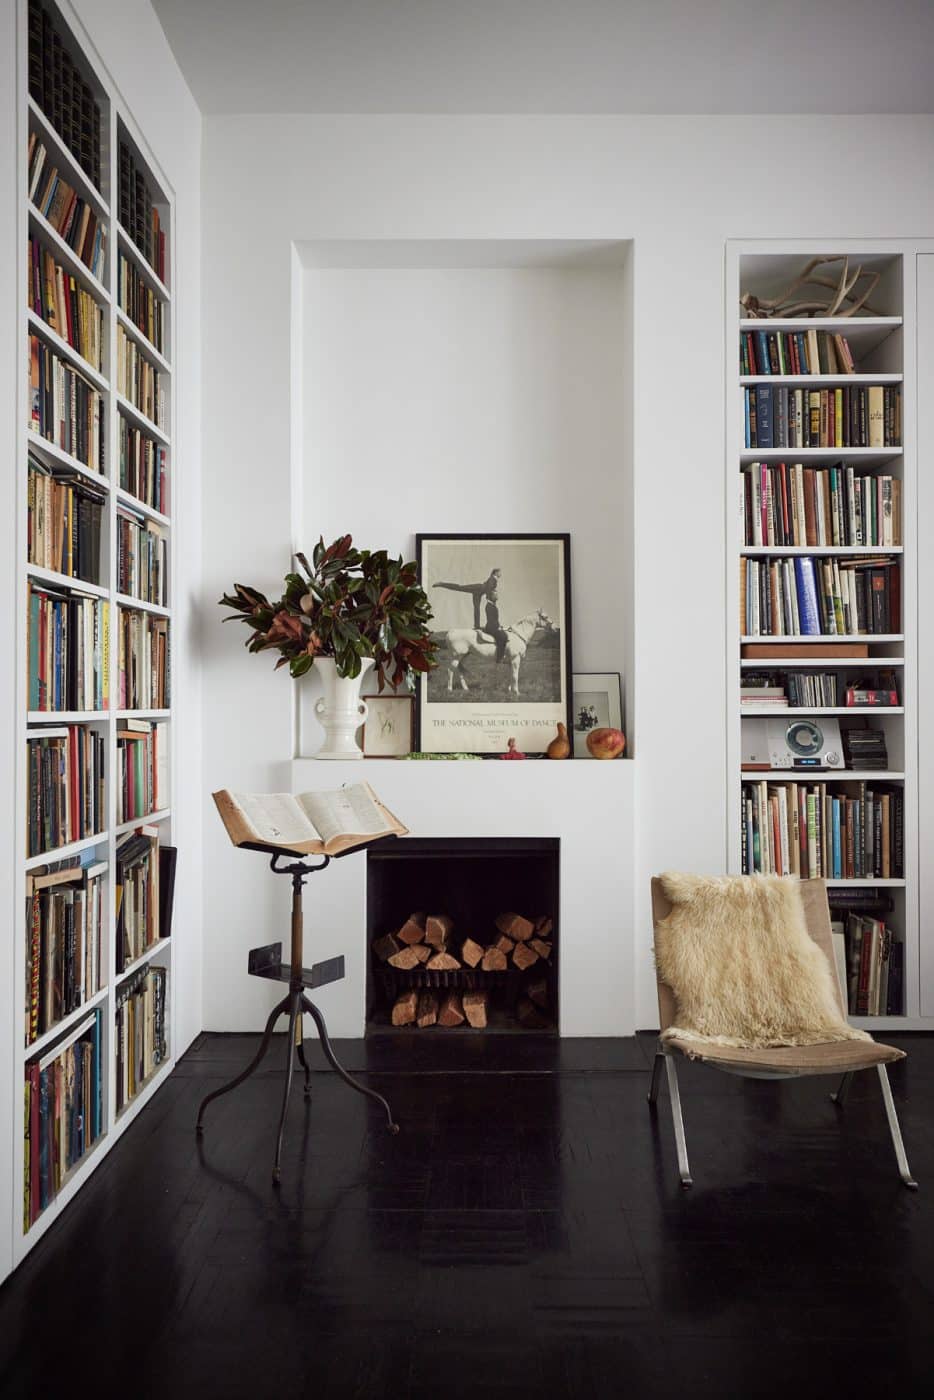 A corner of Tonne Goodman's home that features bookshelves and another fireplace